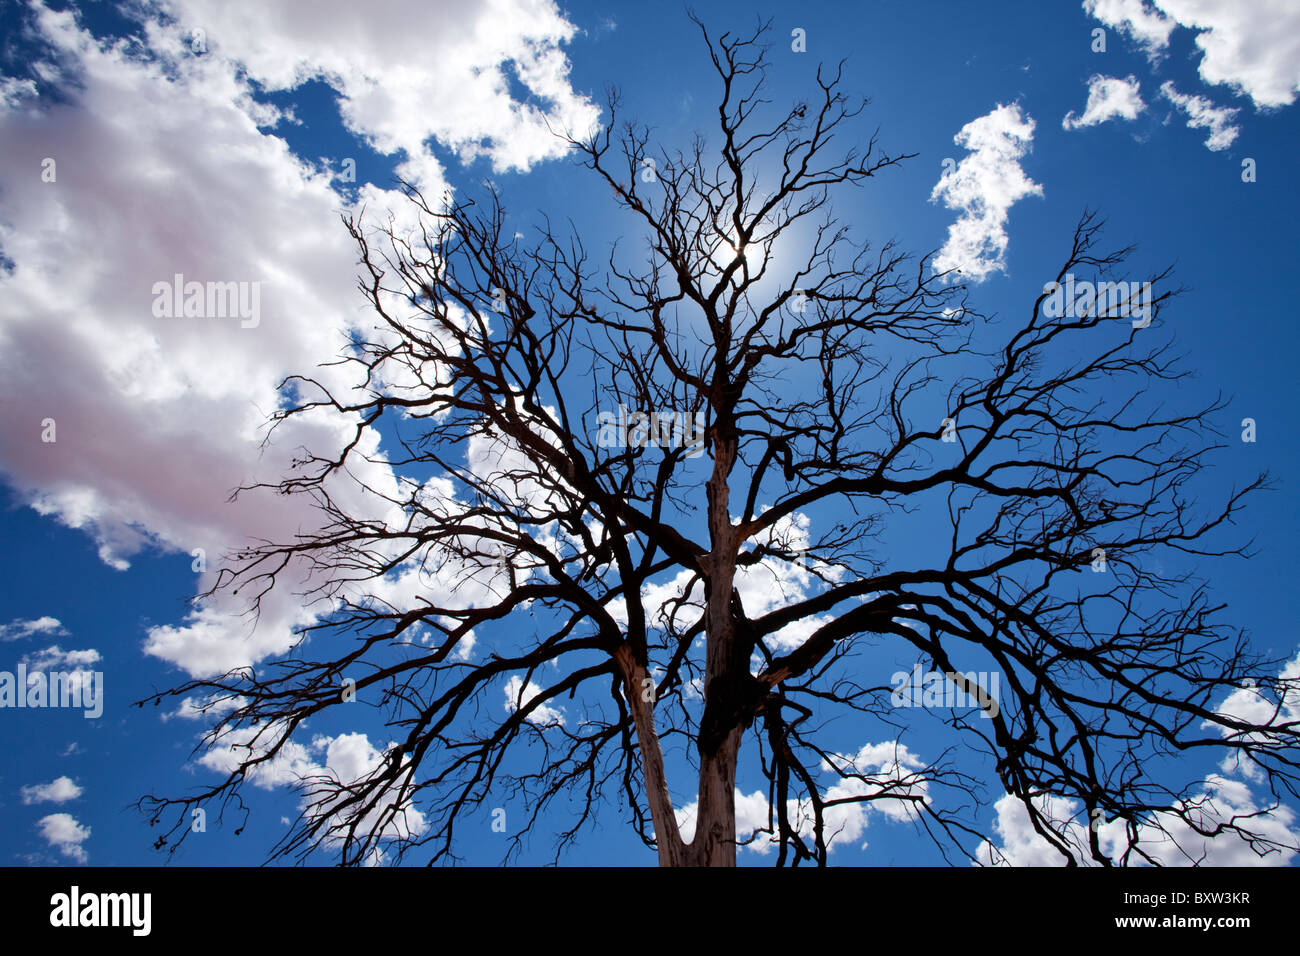 Australia, Northern Territory, Gnarled limbs of dead tree against outback sky along Luritja Road in Outback on summer afternoon Stock Photo